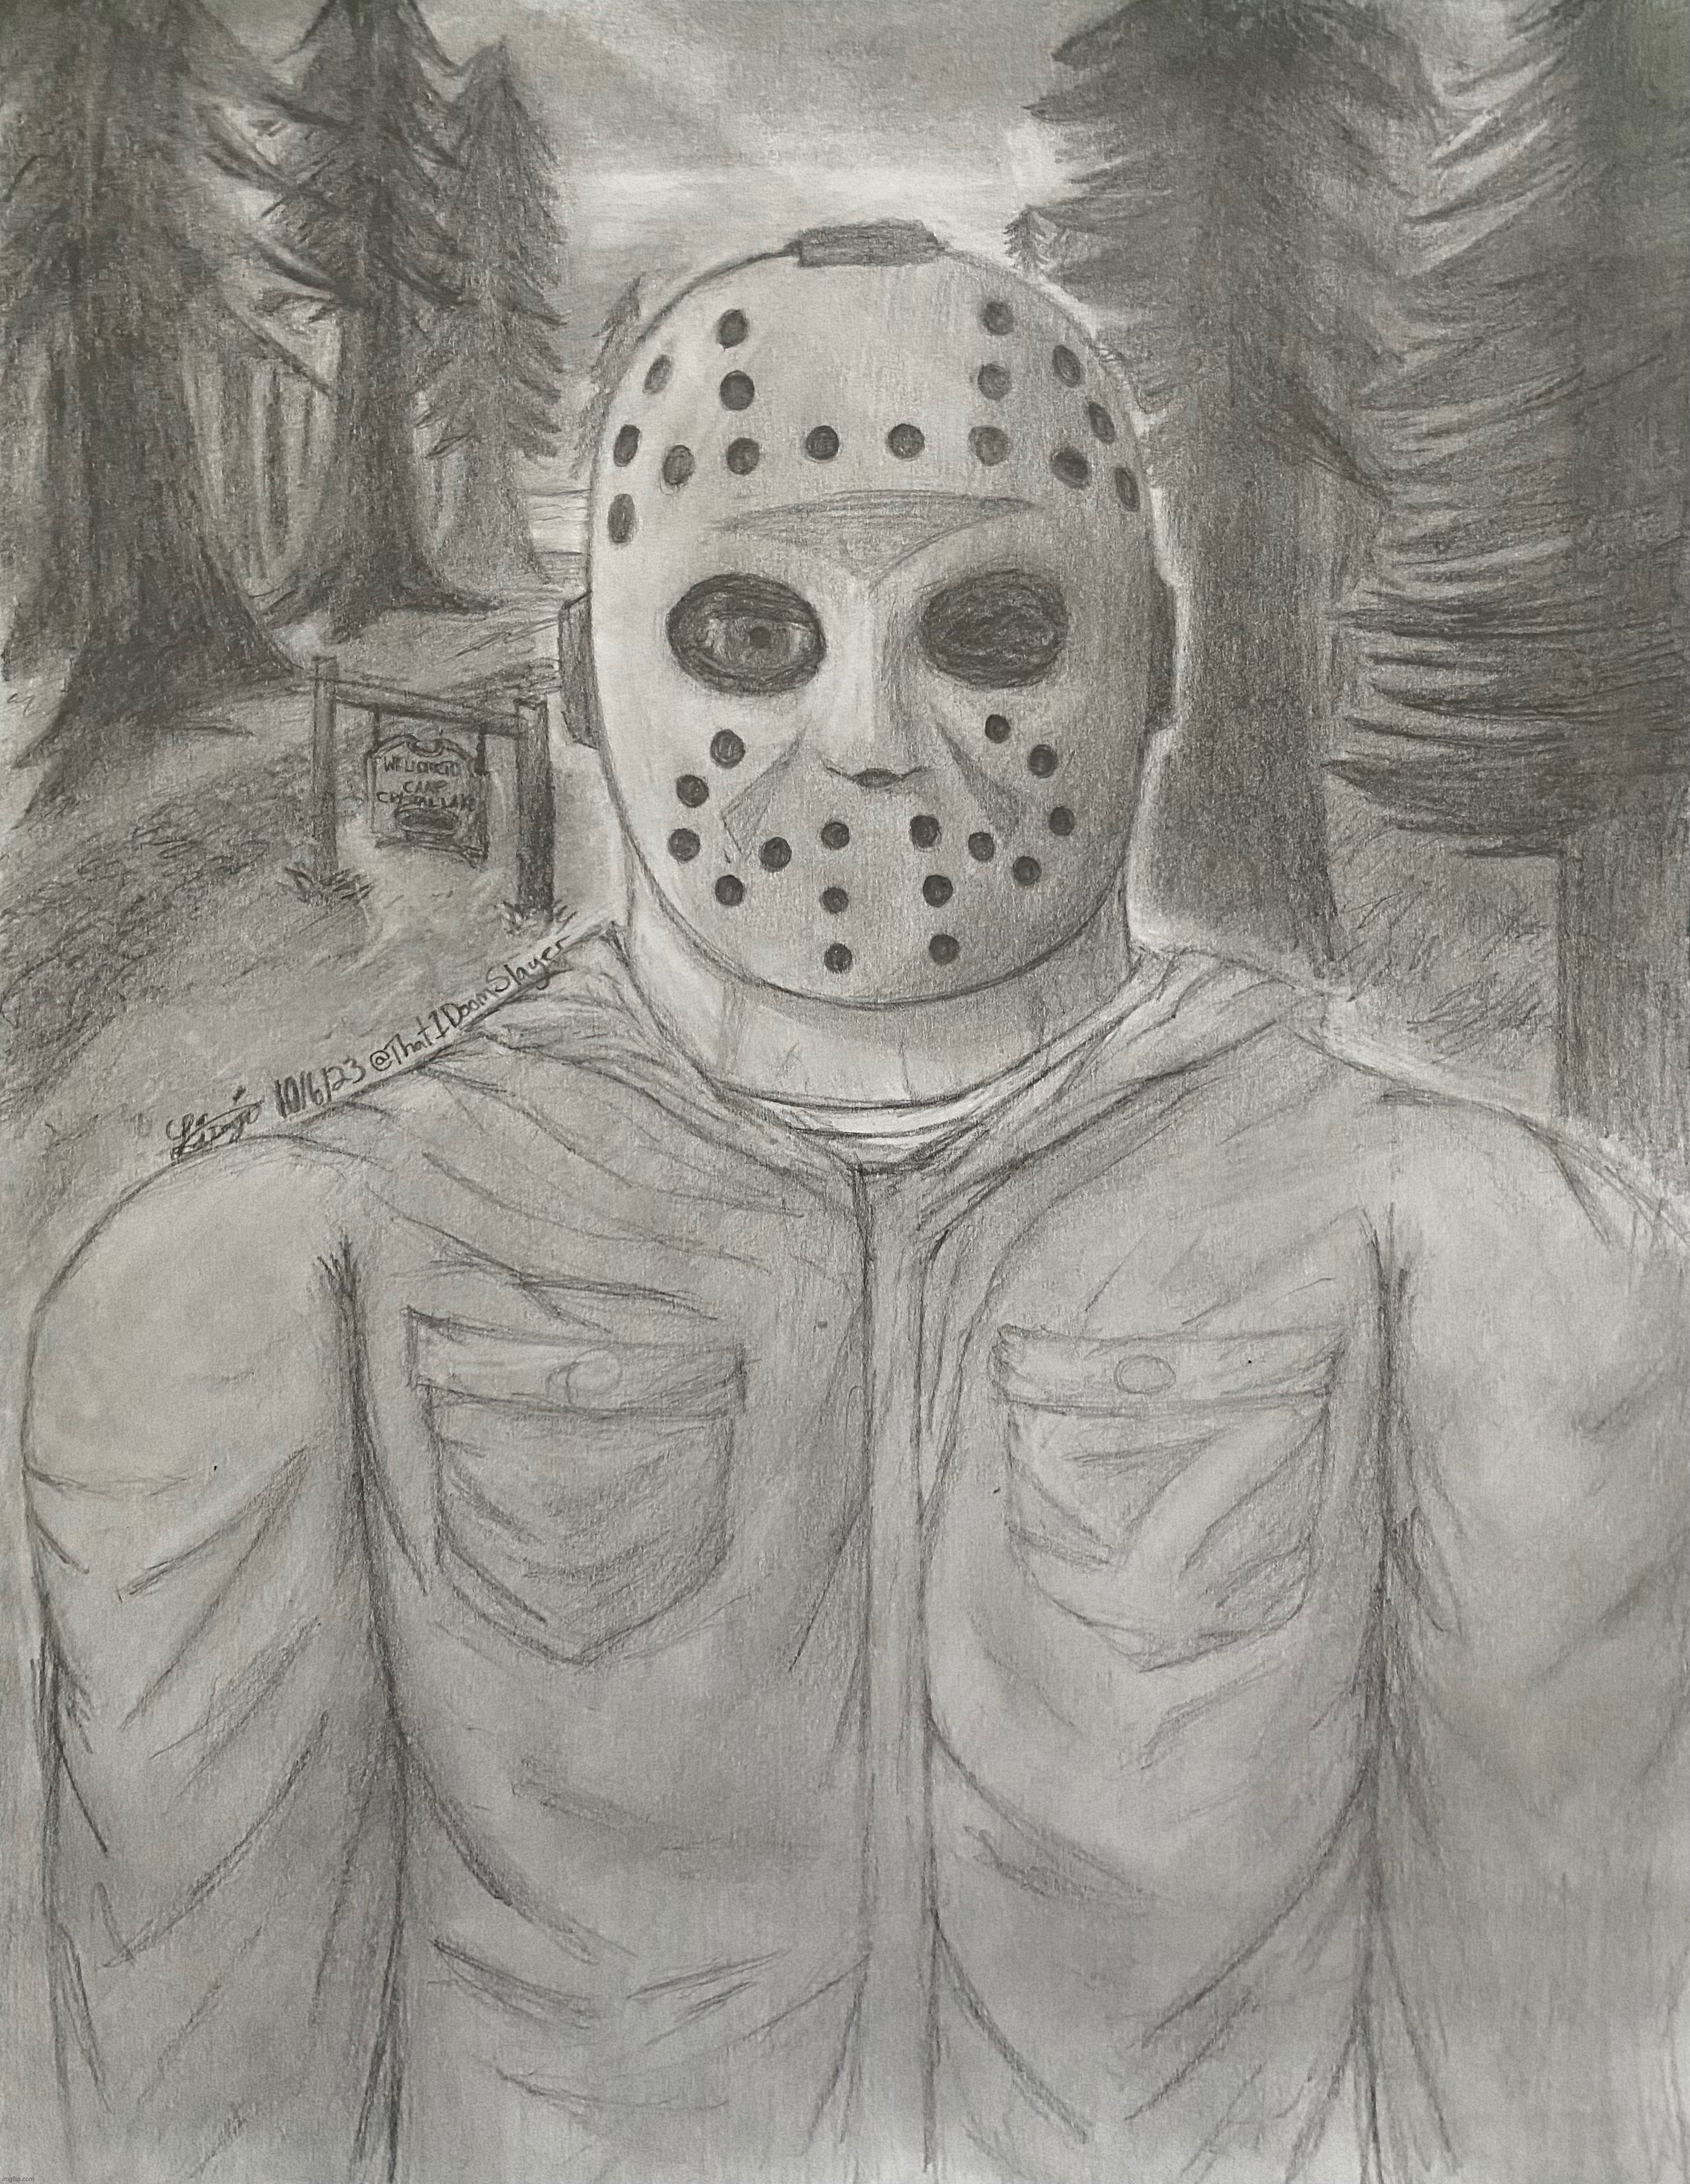 I DO NOT HAVE AN OBSESSION I DO NOT HAVE AN OBSESSION I DO NOT HAVE AN OBSESSION I DO NOT HAVE AN OBSESSION I DO NOT HAVE AN OBS | image tagged in drawing,jason voorhees,friday the 13th,i do not have an obsession,oh who am i kidding i have an obsession,tee hee | made w/ Imgflip meme maker